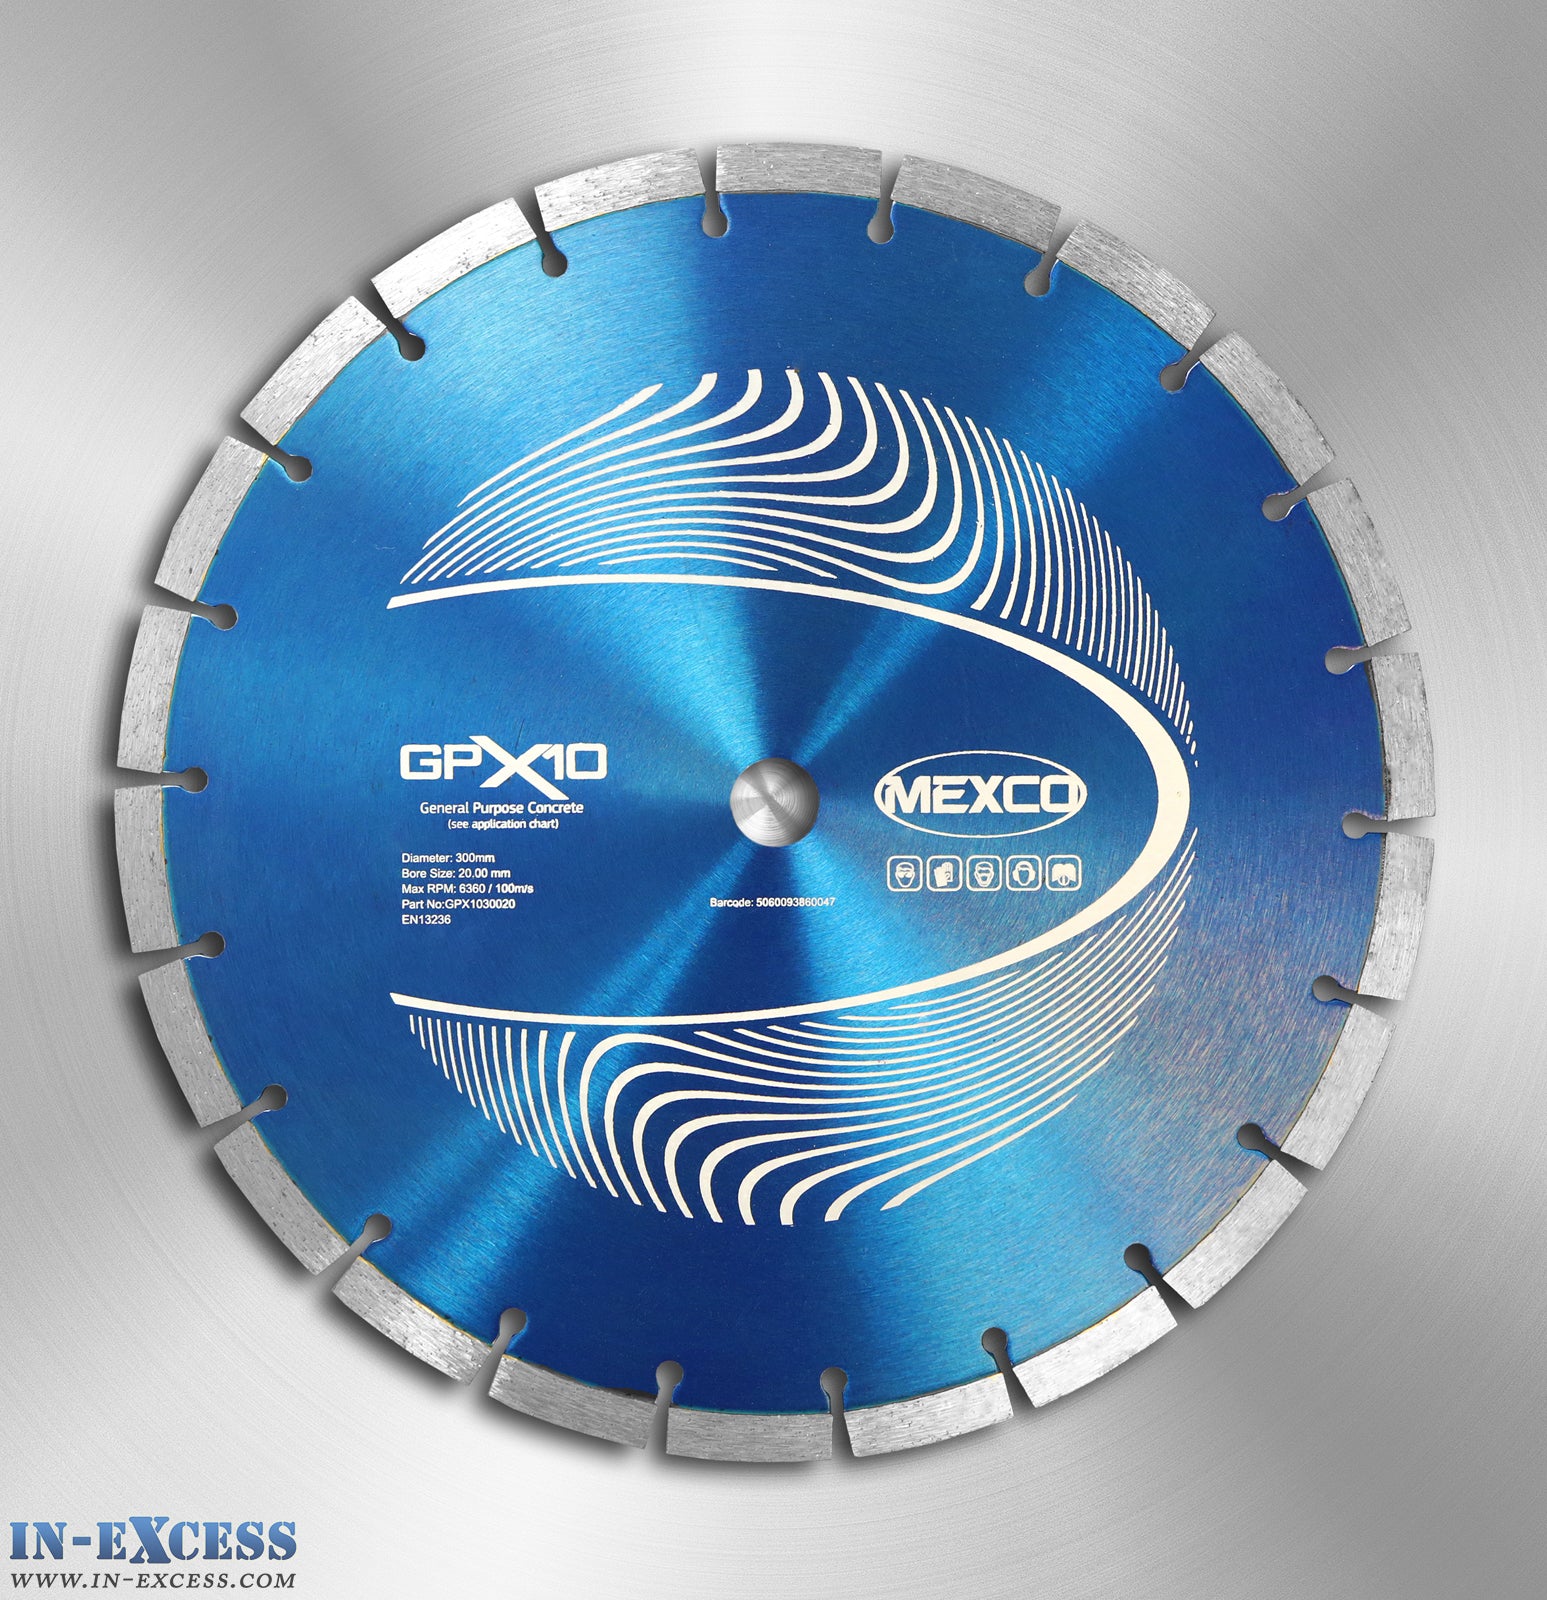 Mexco Professional GPX10 Diamond Cutting Disc for Concrete 300mm